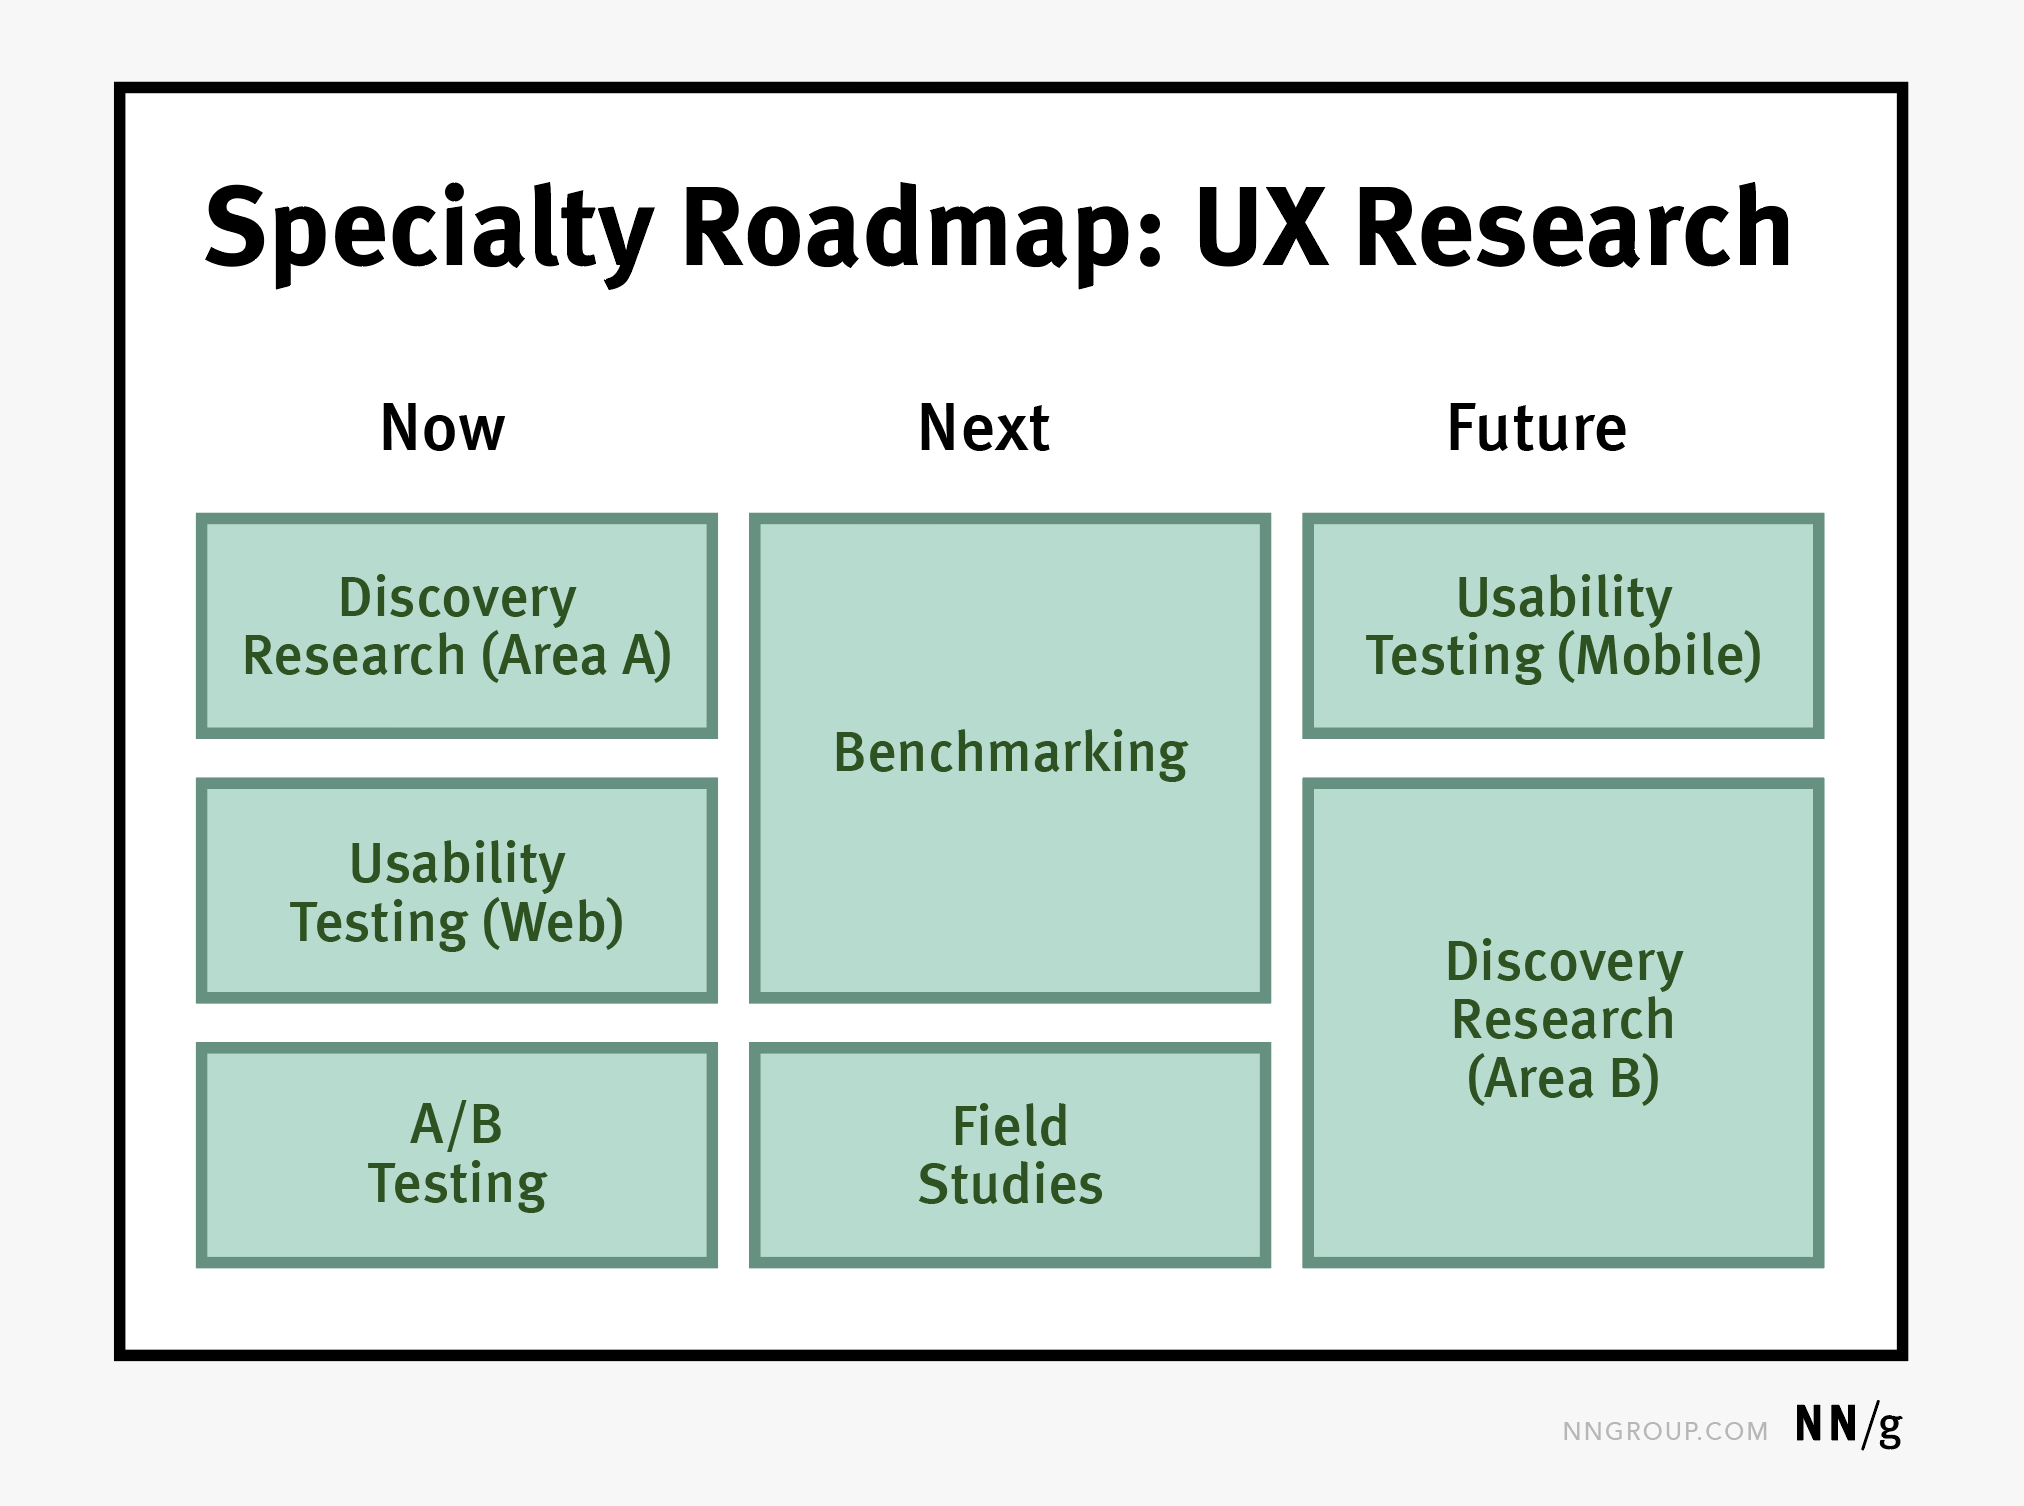 Specialty roadmaps map a specific UX area. 